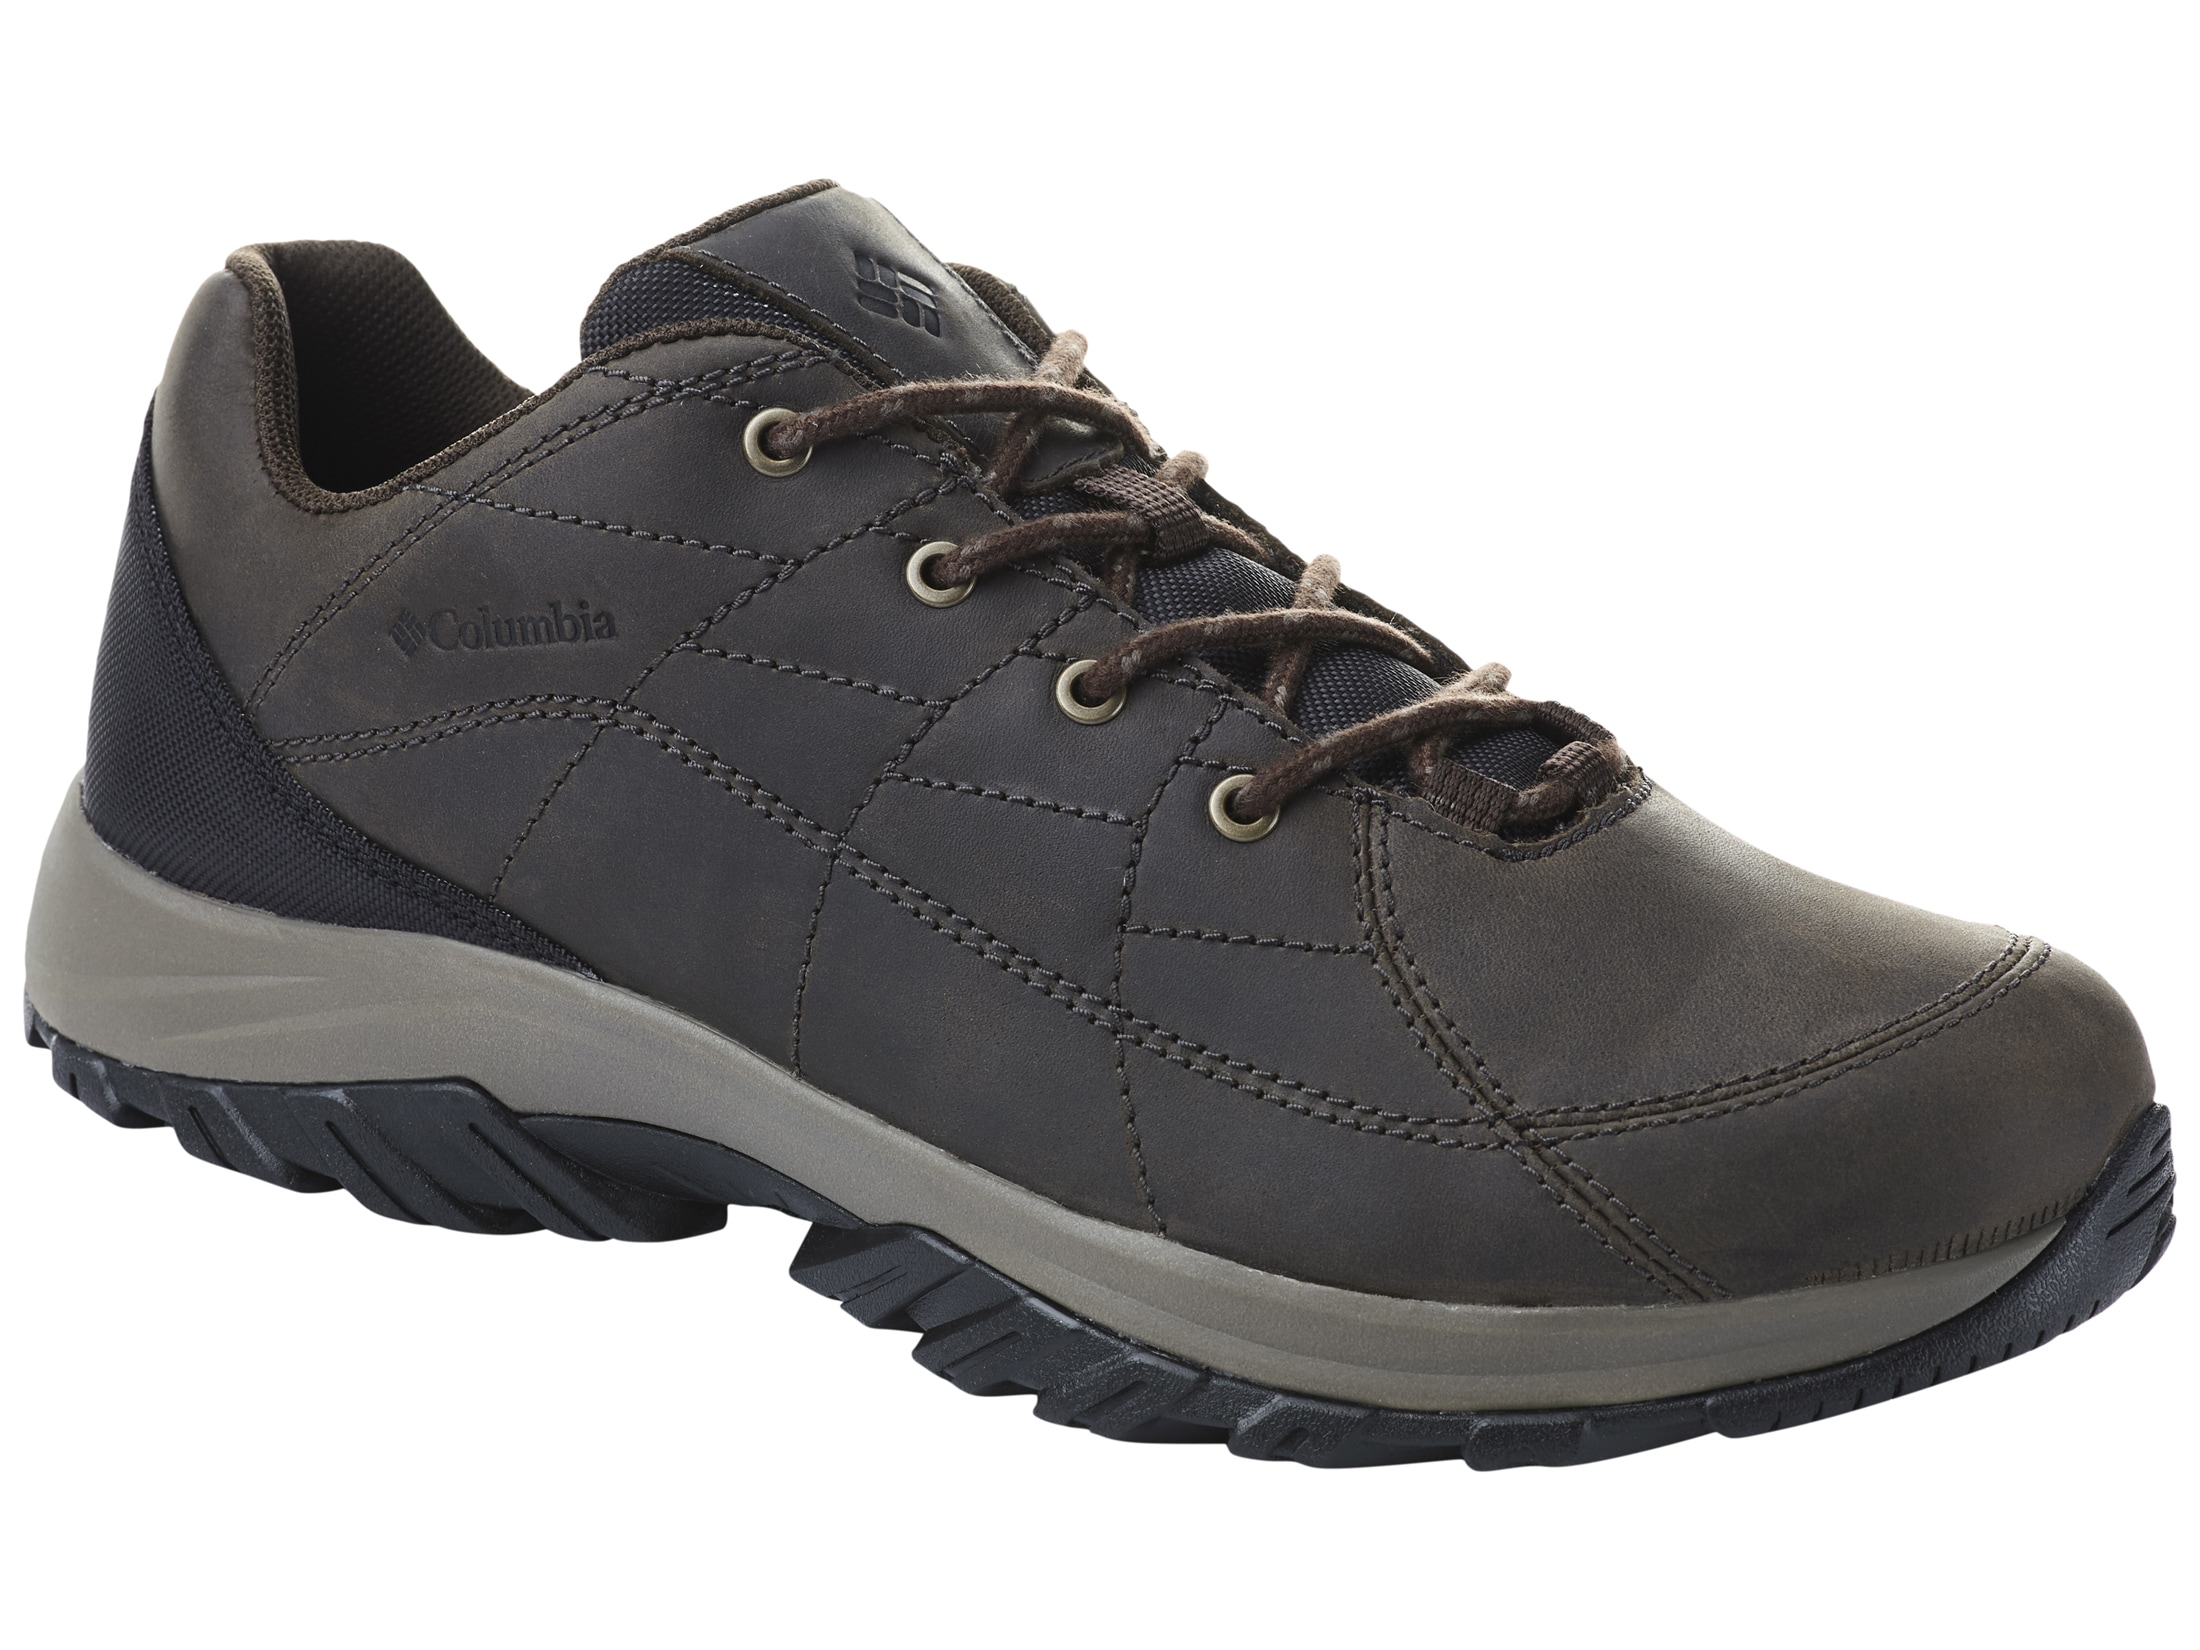 Columbia Crestwood Venture Hiking Shoes Full-Grain Leather